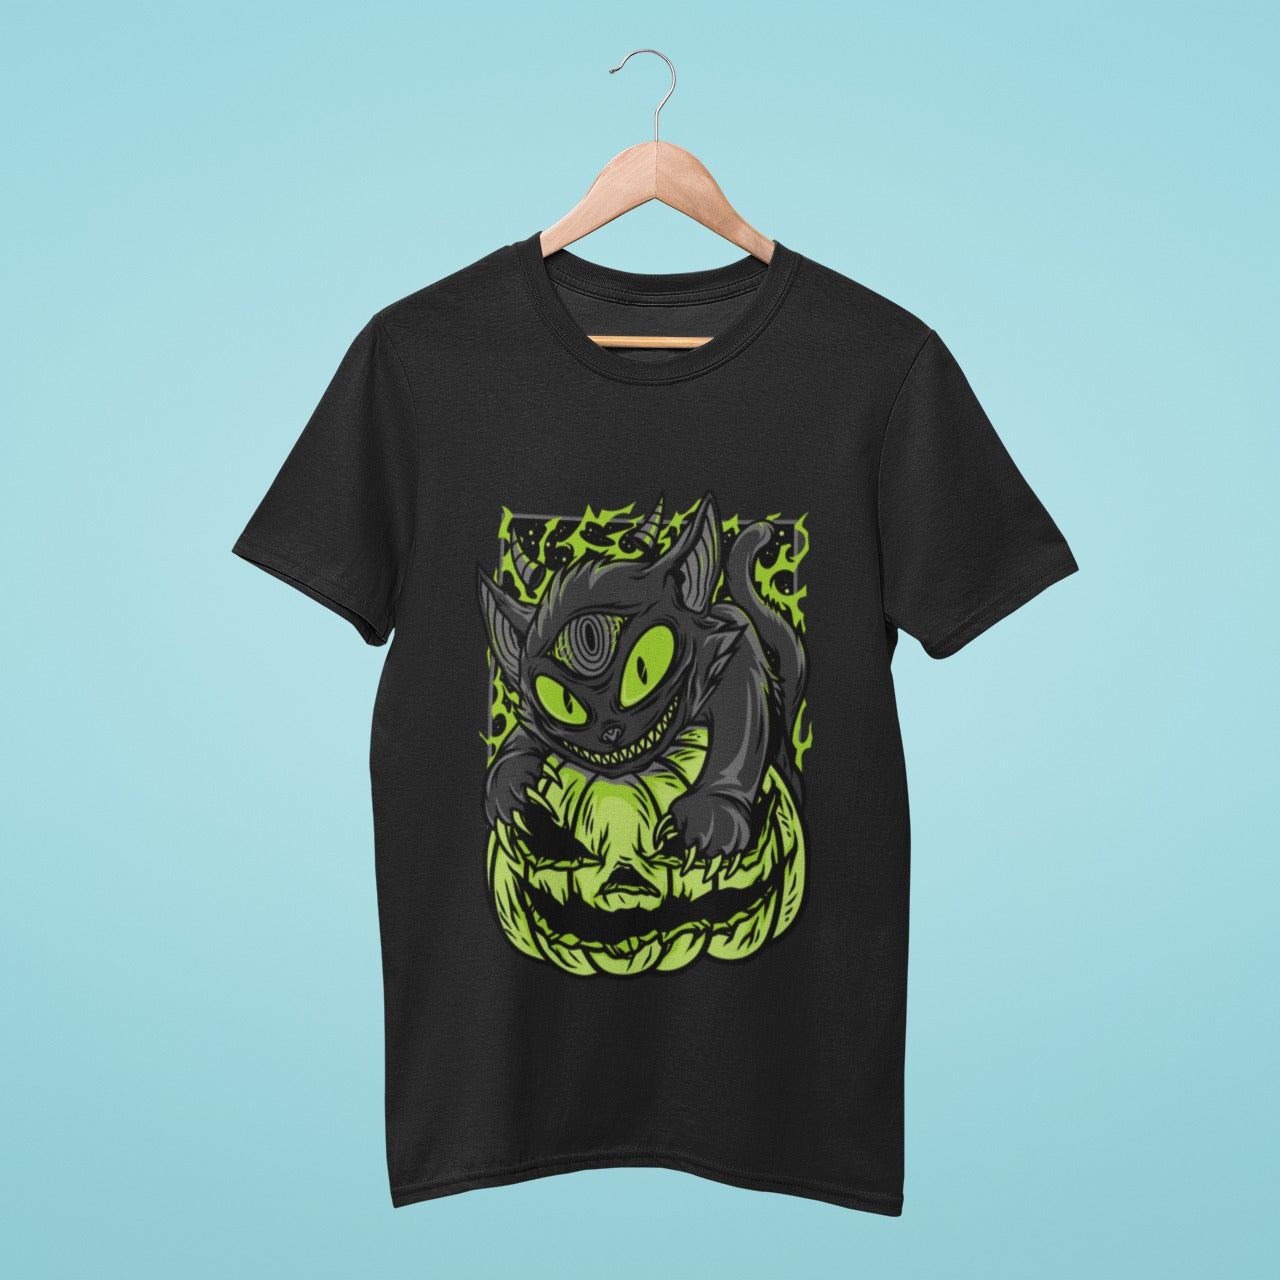 This black t-shirt features a striking design of a black cat with an open third eye pouncing on a neon green Halloween pumpkin. Made from high-quality materials, it's perfect for Halloween parties or showing off your spooky style. Order now to make a statement this Halloween!